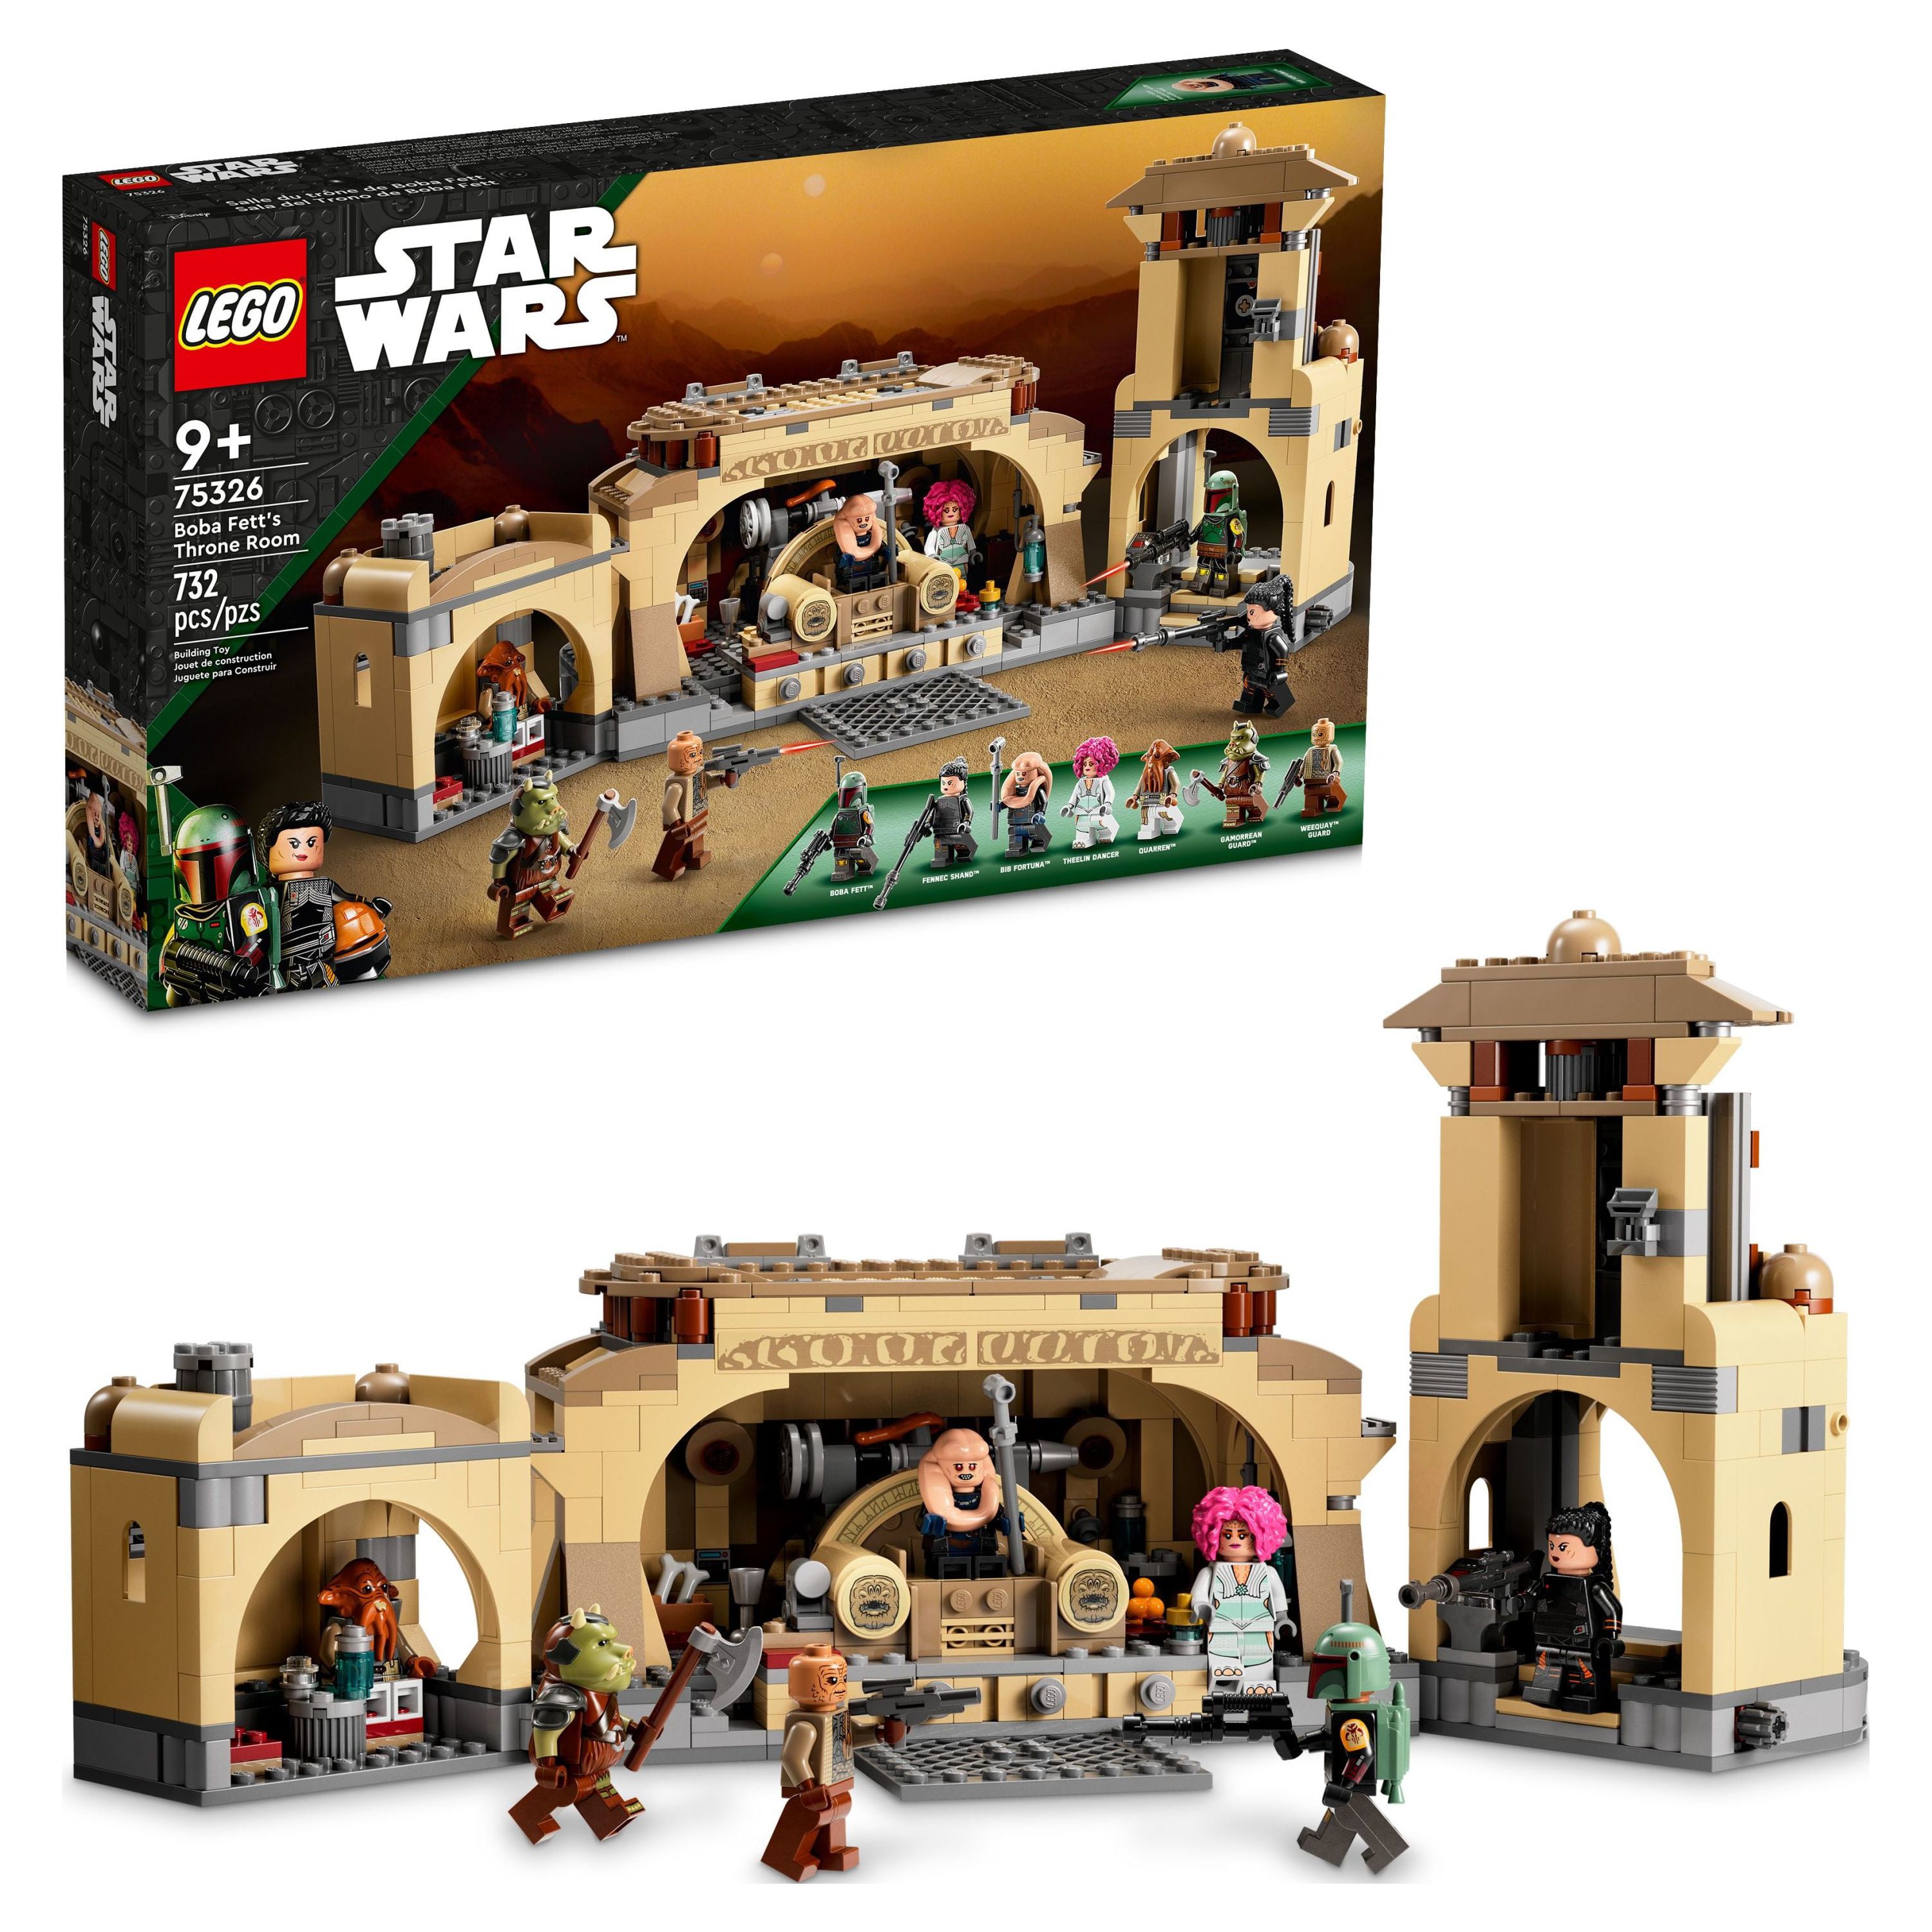 LEGO Star Wars Boba Fett’s Throne Room Building Kit 75326, with Jabba The Hutt Palace and 7 Minifigures, Star Wars Building Set, Great Gift For Star Wars Fans, Boys, Girls, Kids Age 7+ Years Old - image 1 of 8